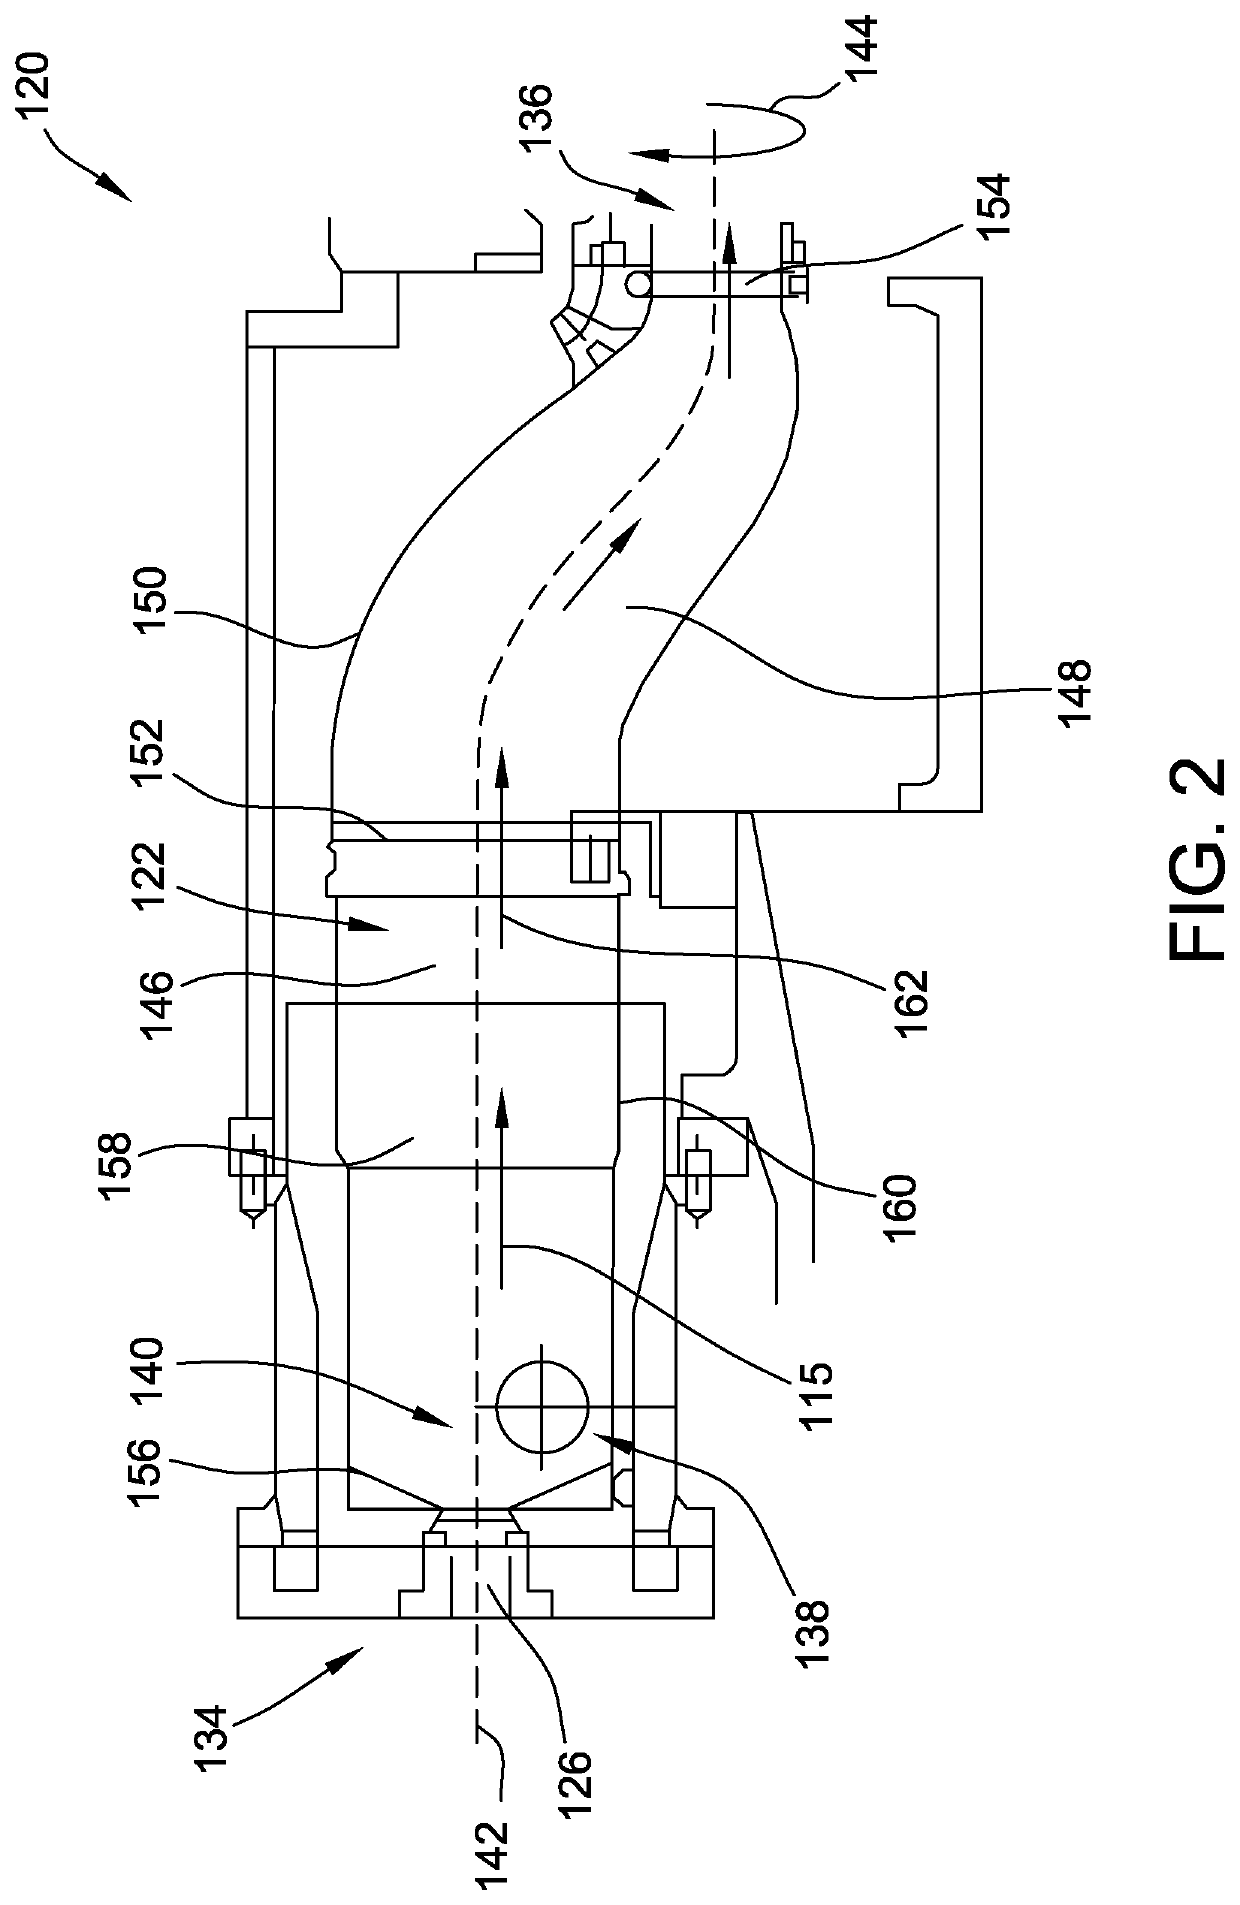 Sleeve assemblies and methods of fabricating same